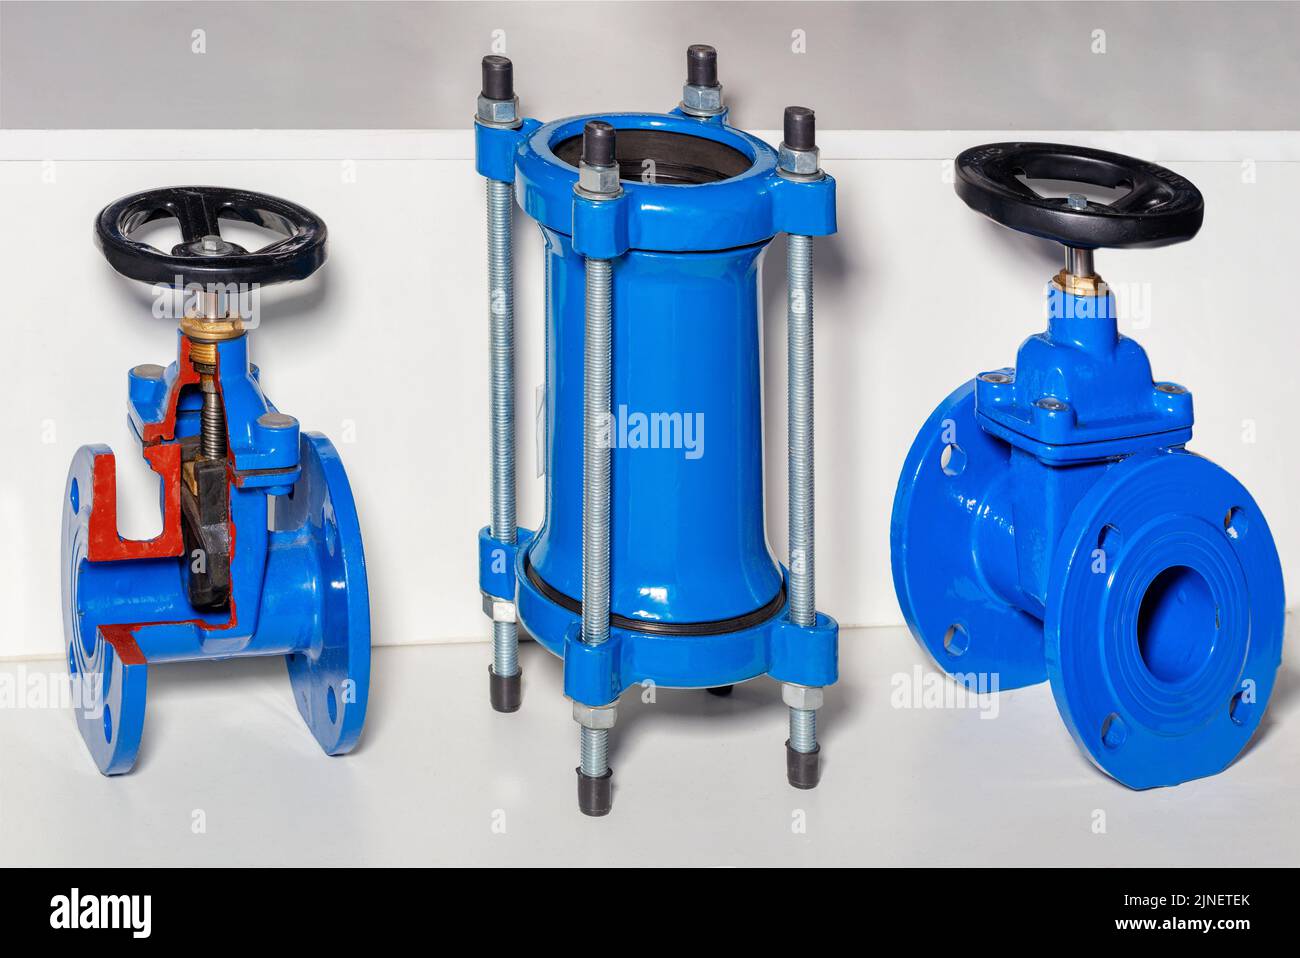 Industrial shut-off valves and coupling for use in pipelines and cold or hot water circulation. Stock Photo